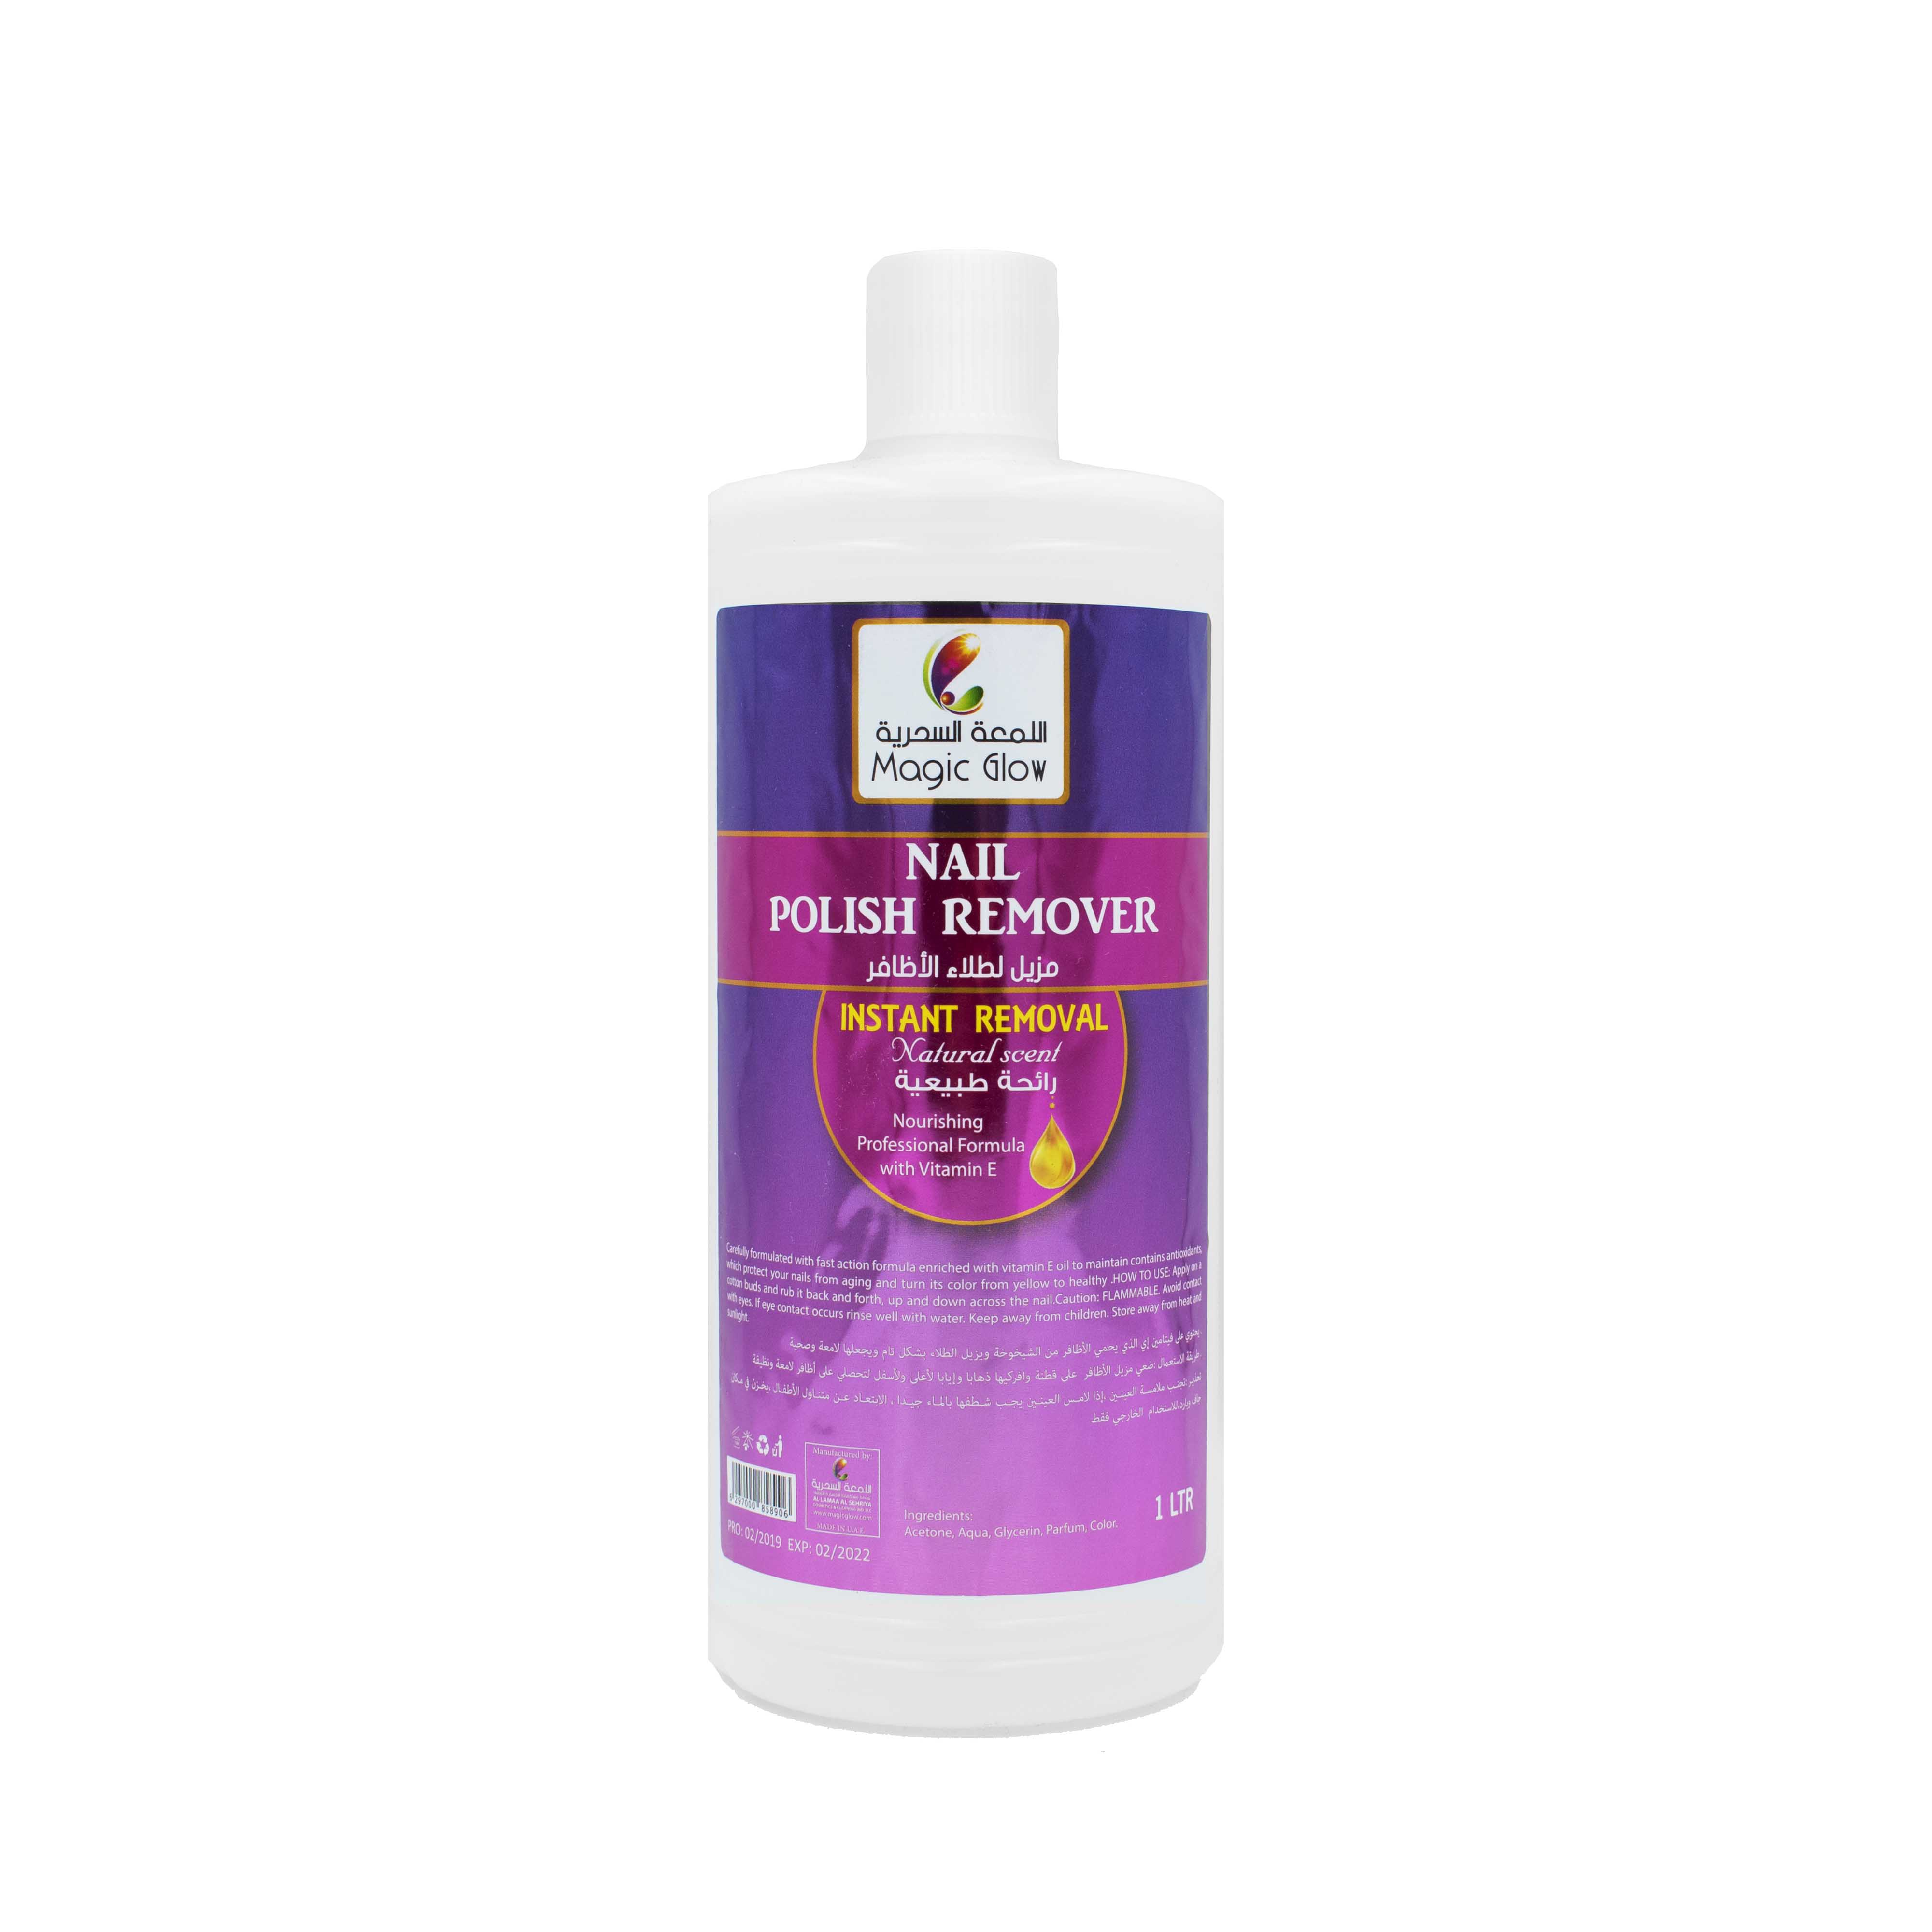 Whitening nail polish remover- Combo pack | Bloomsberry Website